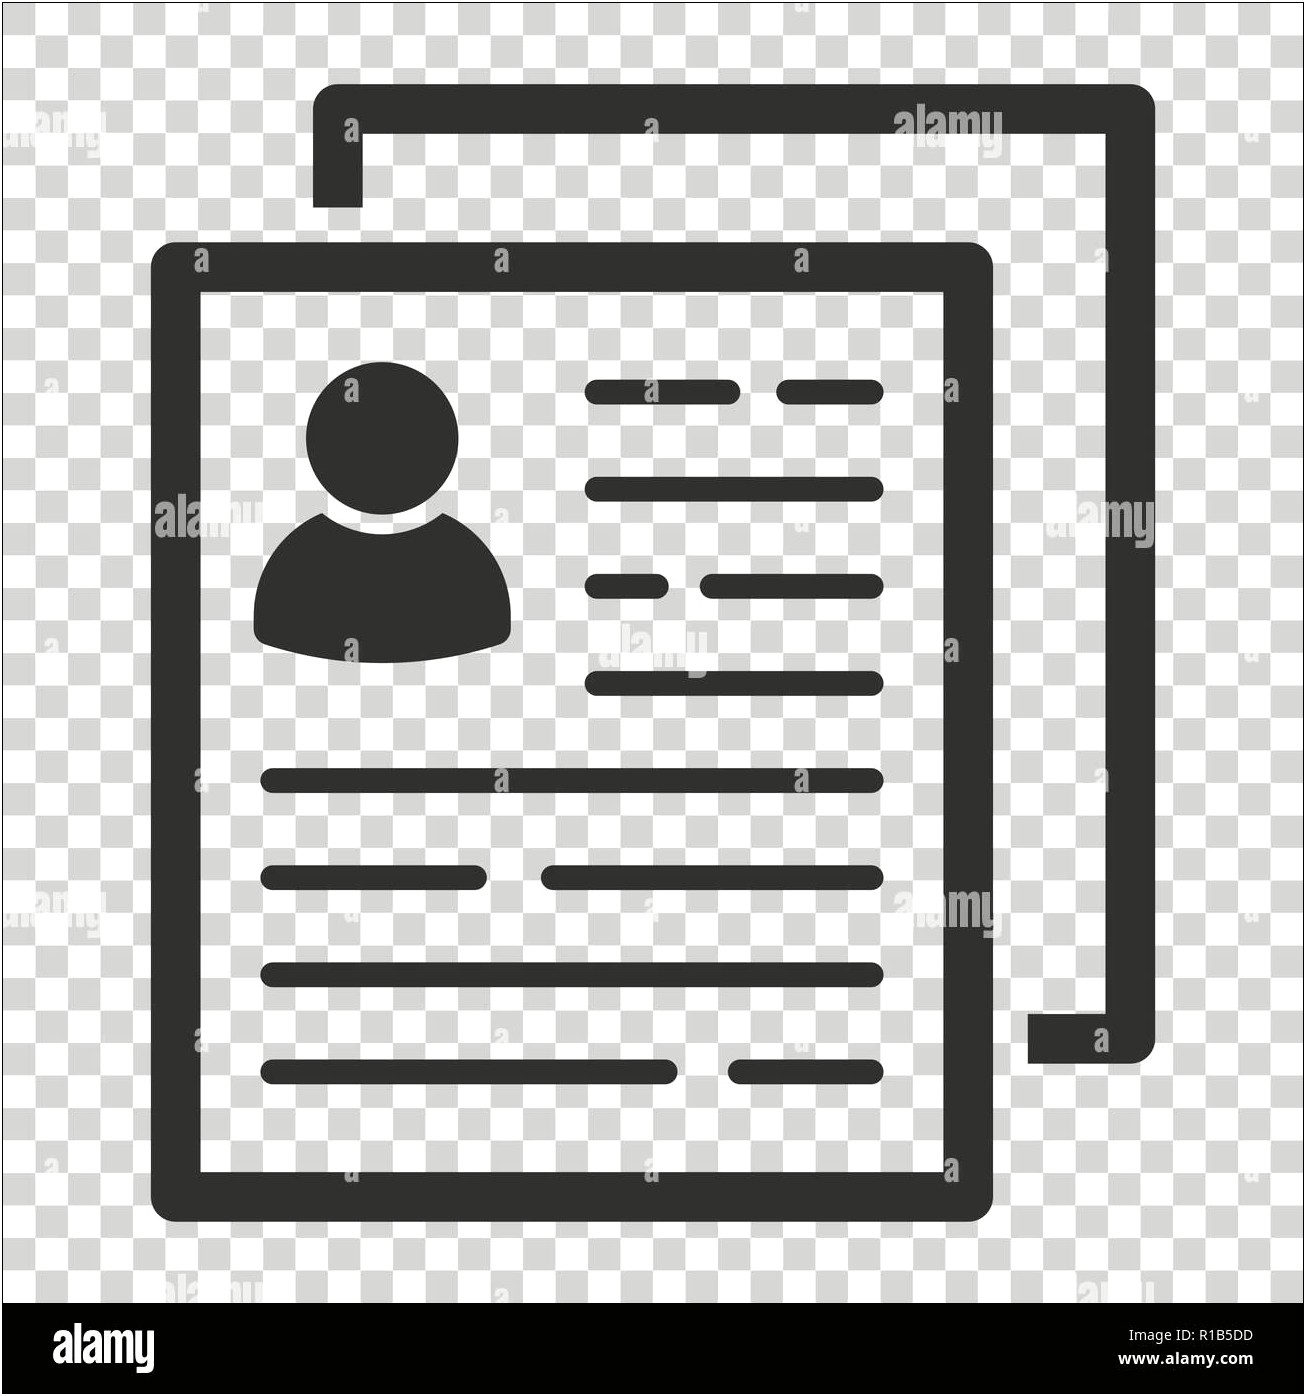 Free Icon Fonts For Resumes 2018 Google Docs